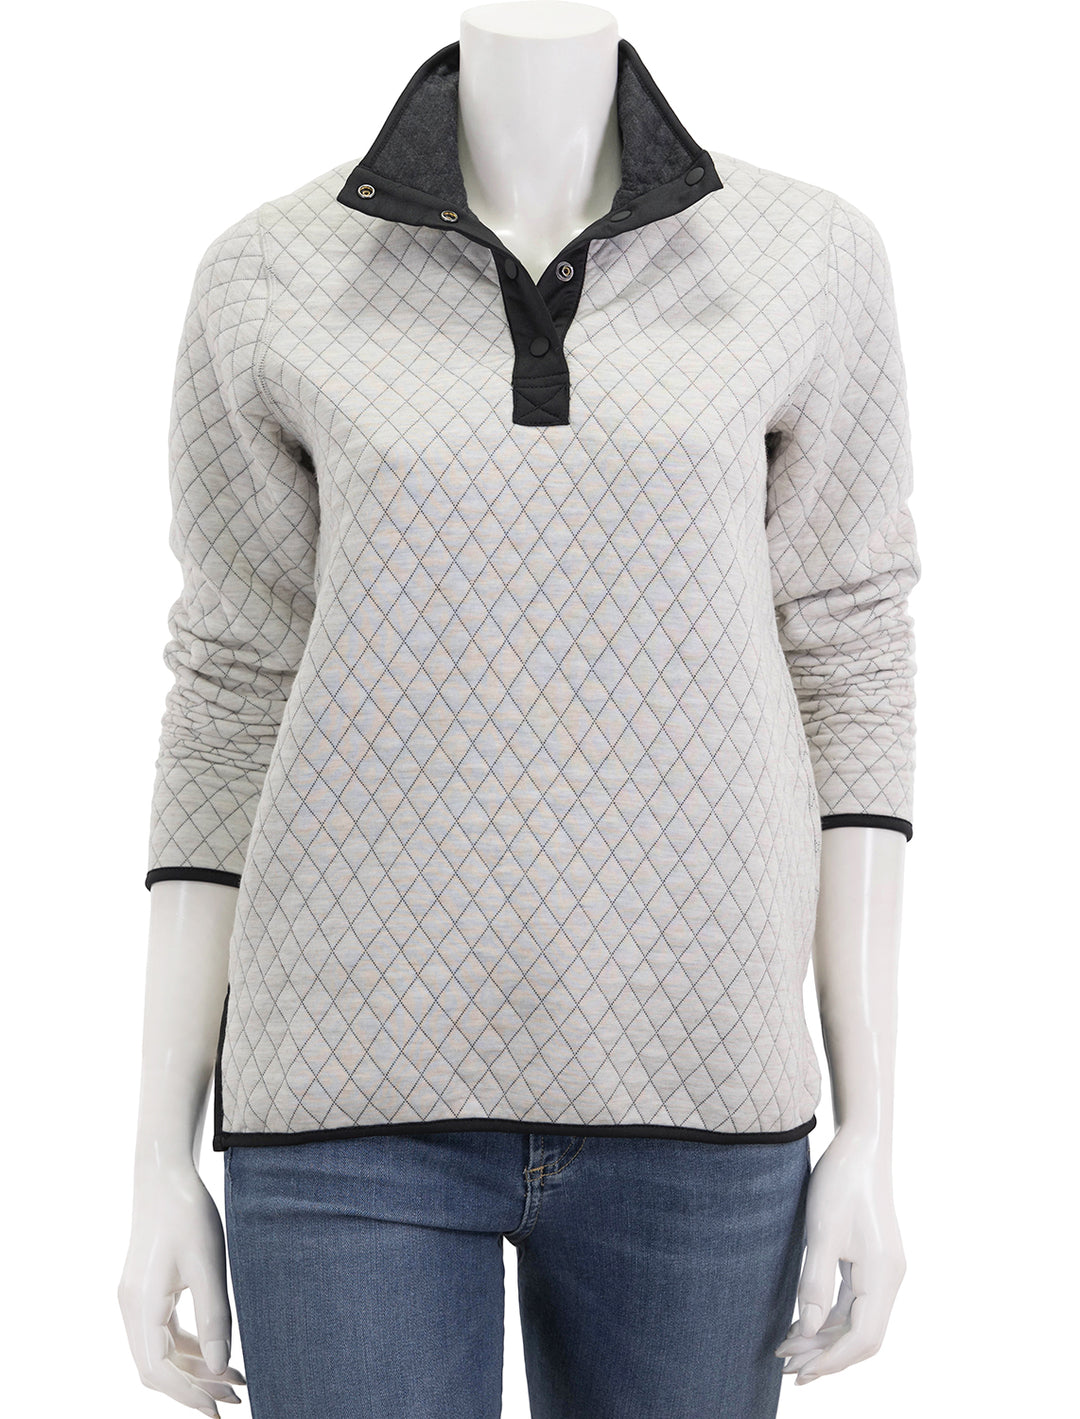 Front view of Marine Layer's corbet reversible pullover in white and black.